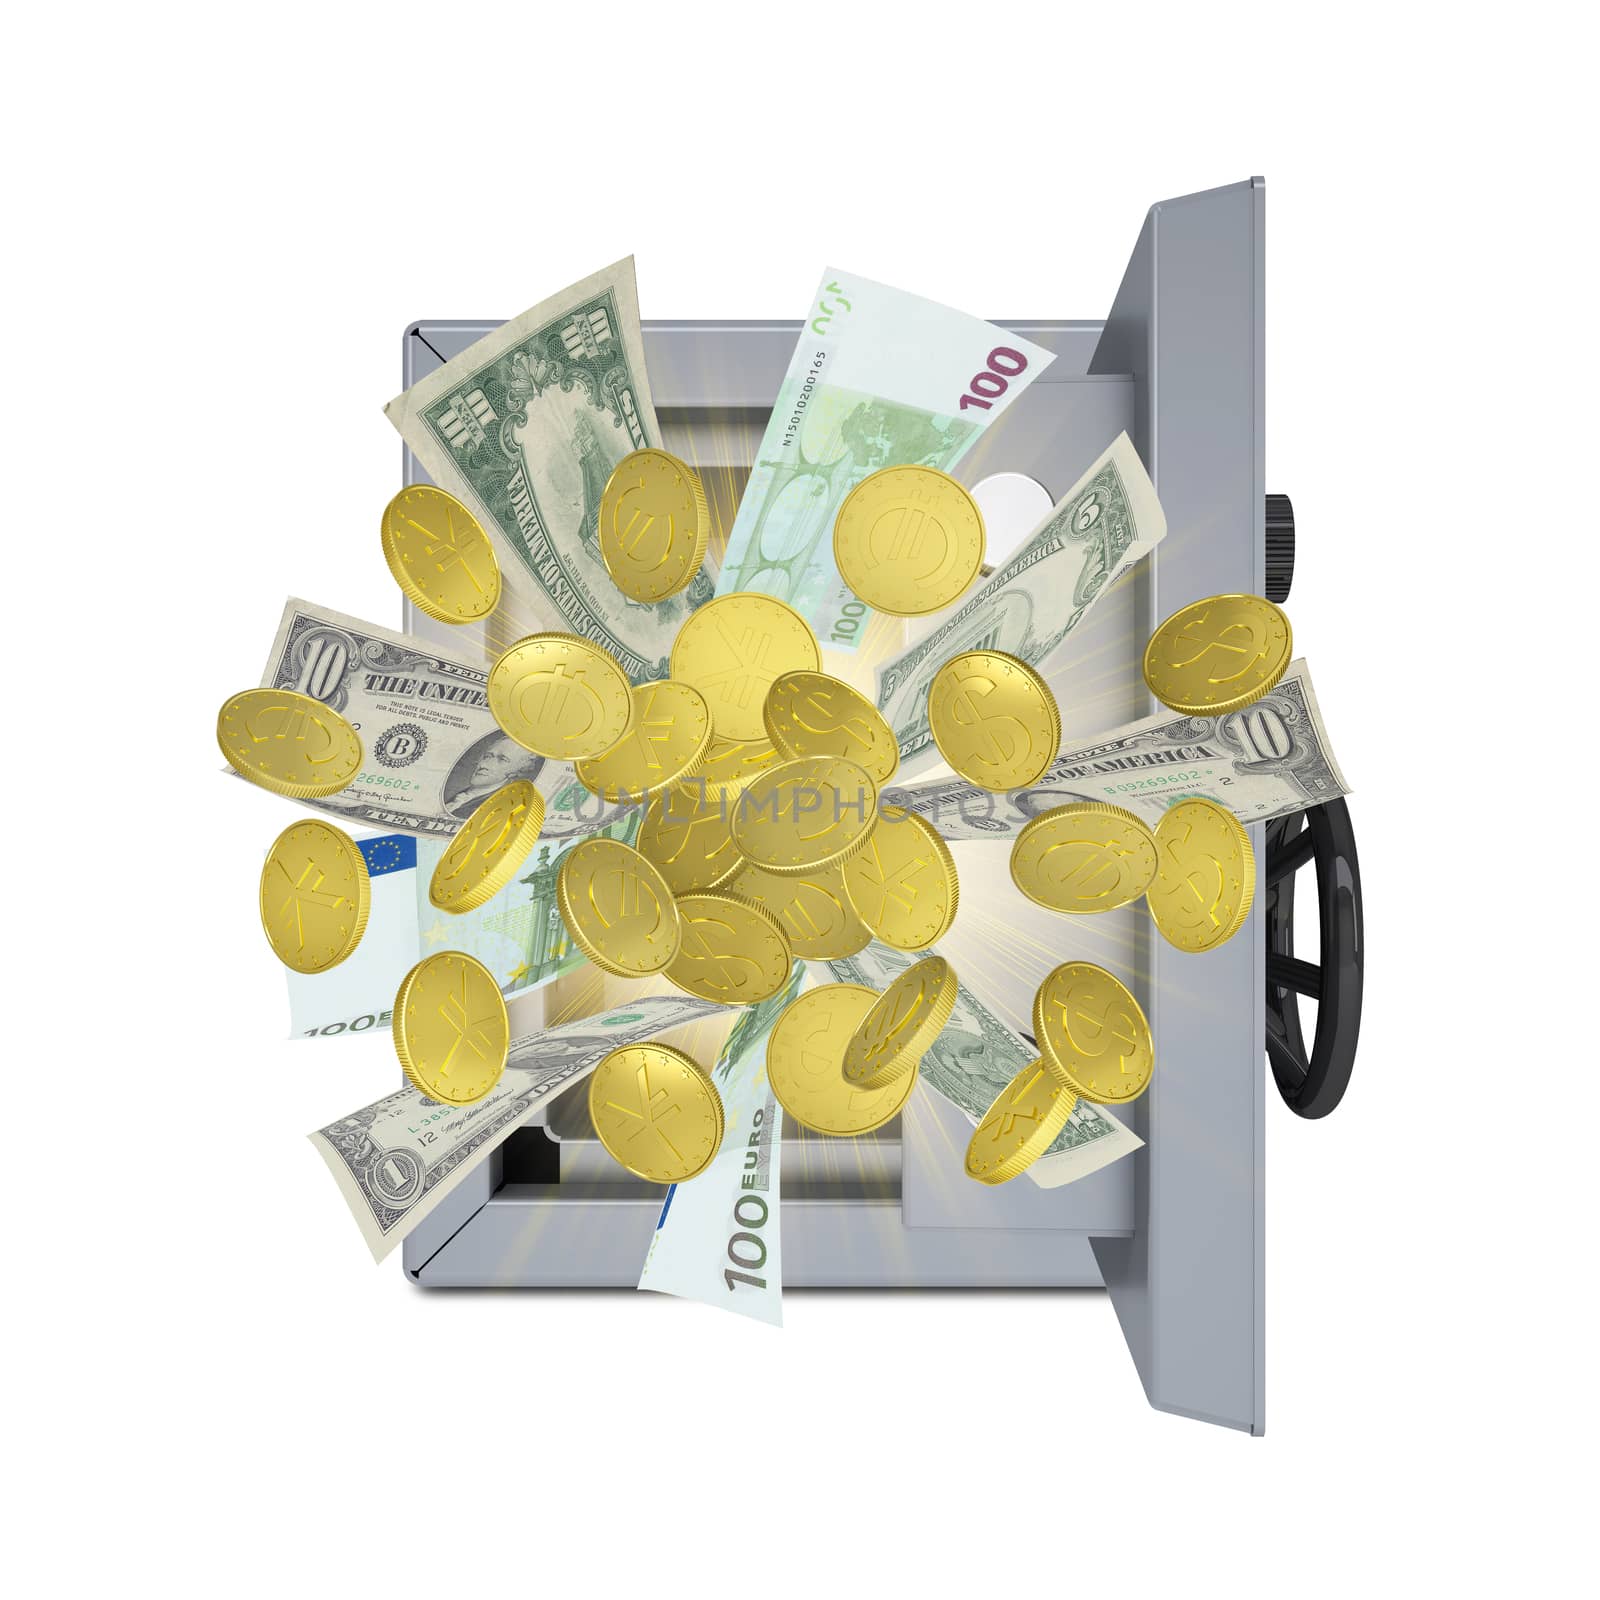 Banknotes and coins are emitted from an open safe by cherezoff